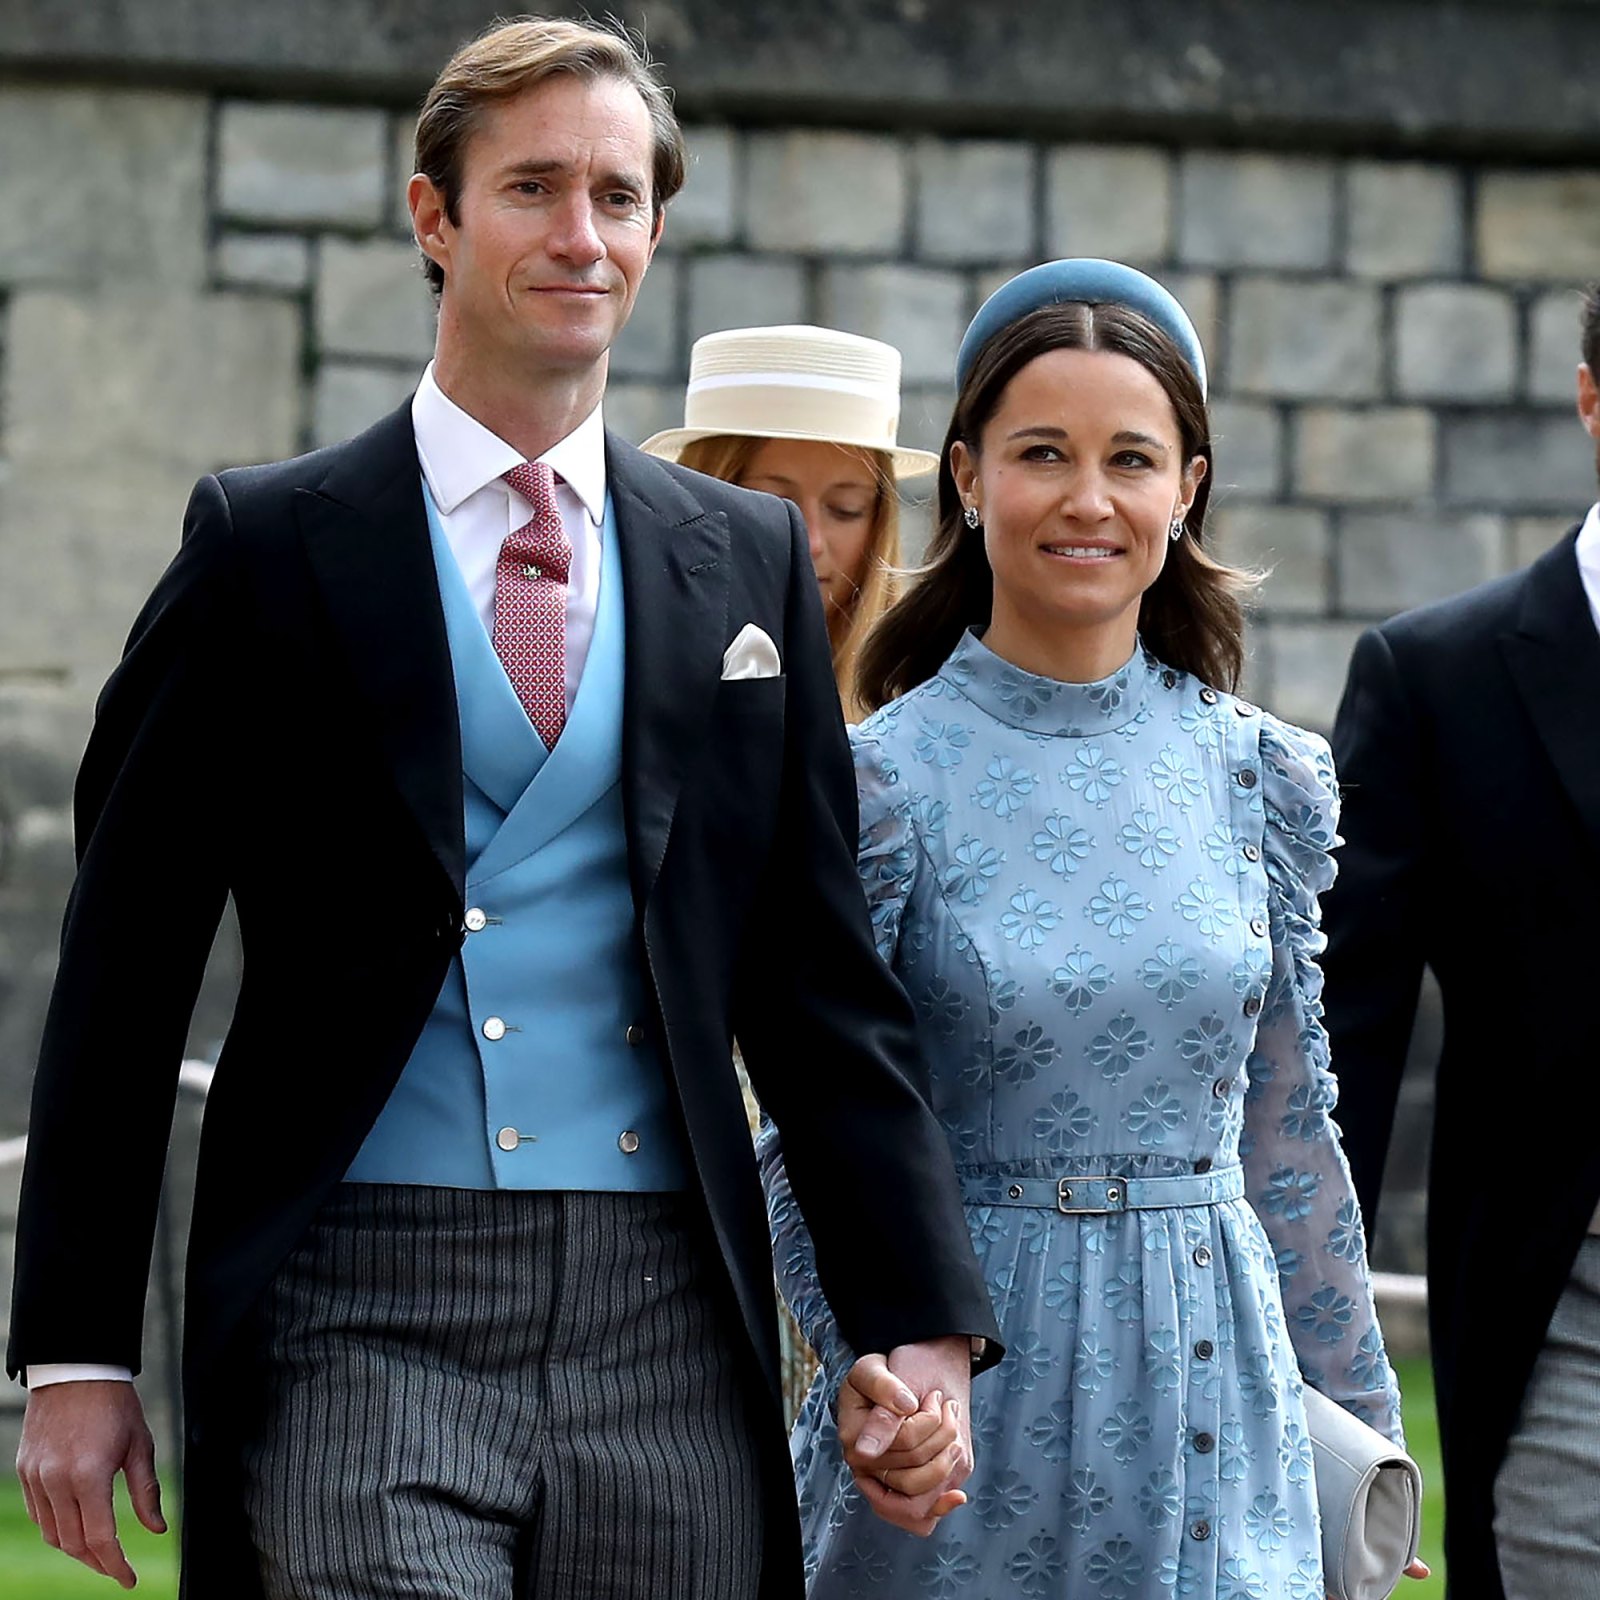 Pippa Middleton Gives Birth, Welcomes 3rd Child With Husband James Matthews